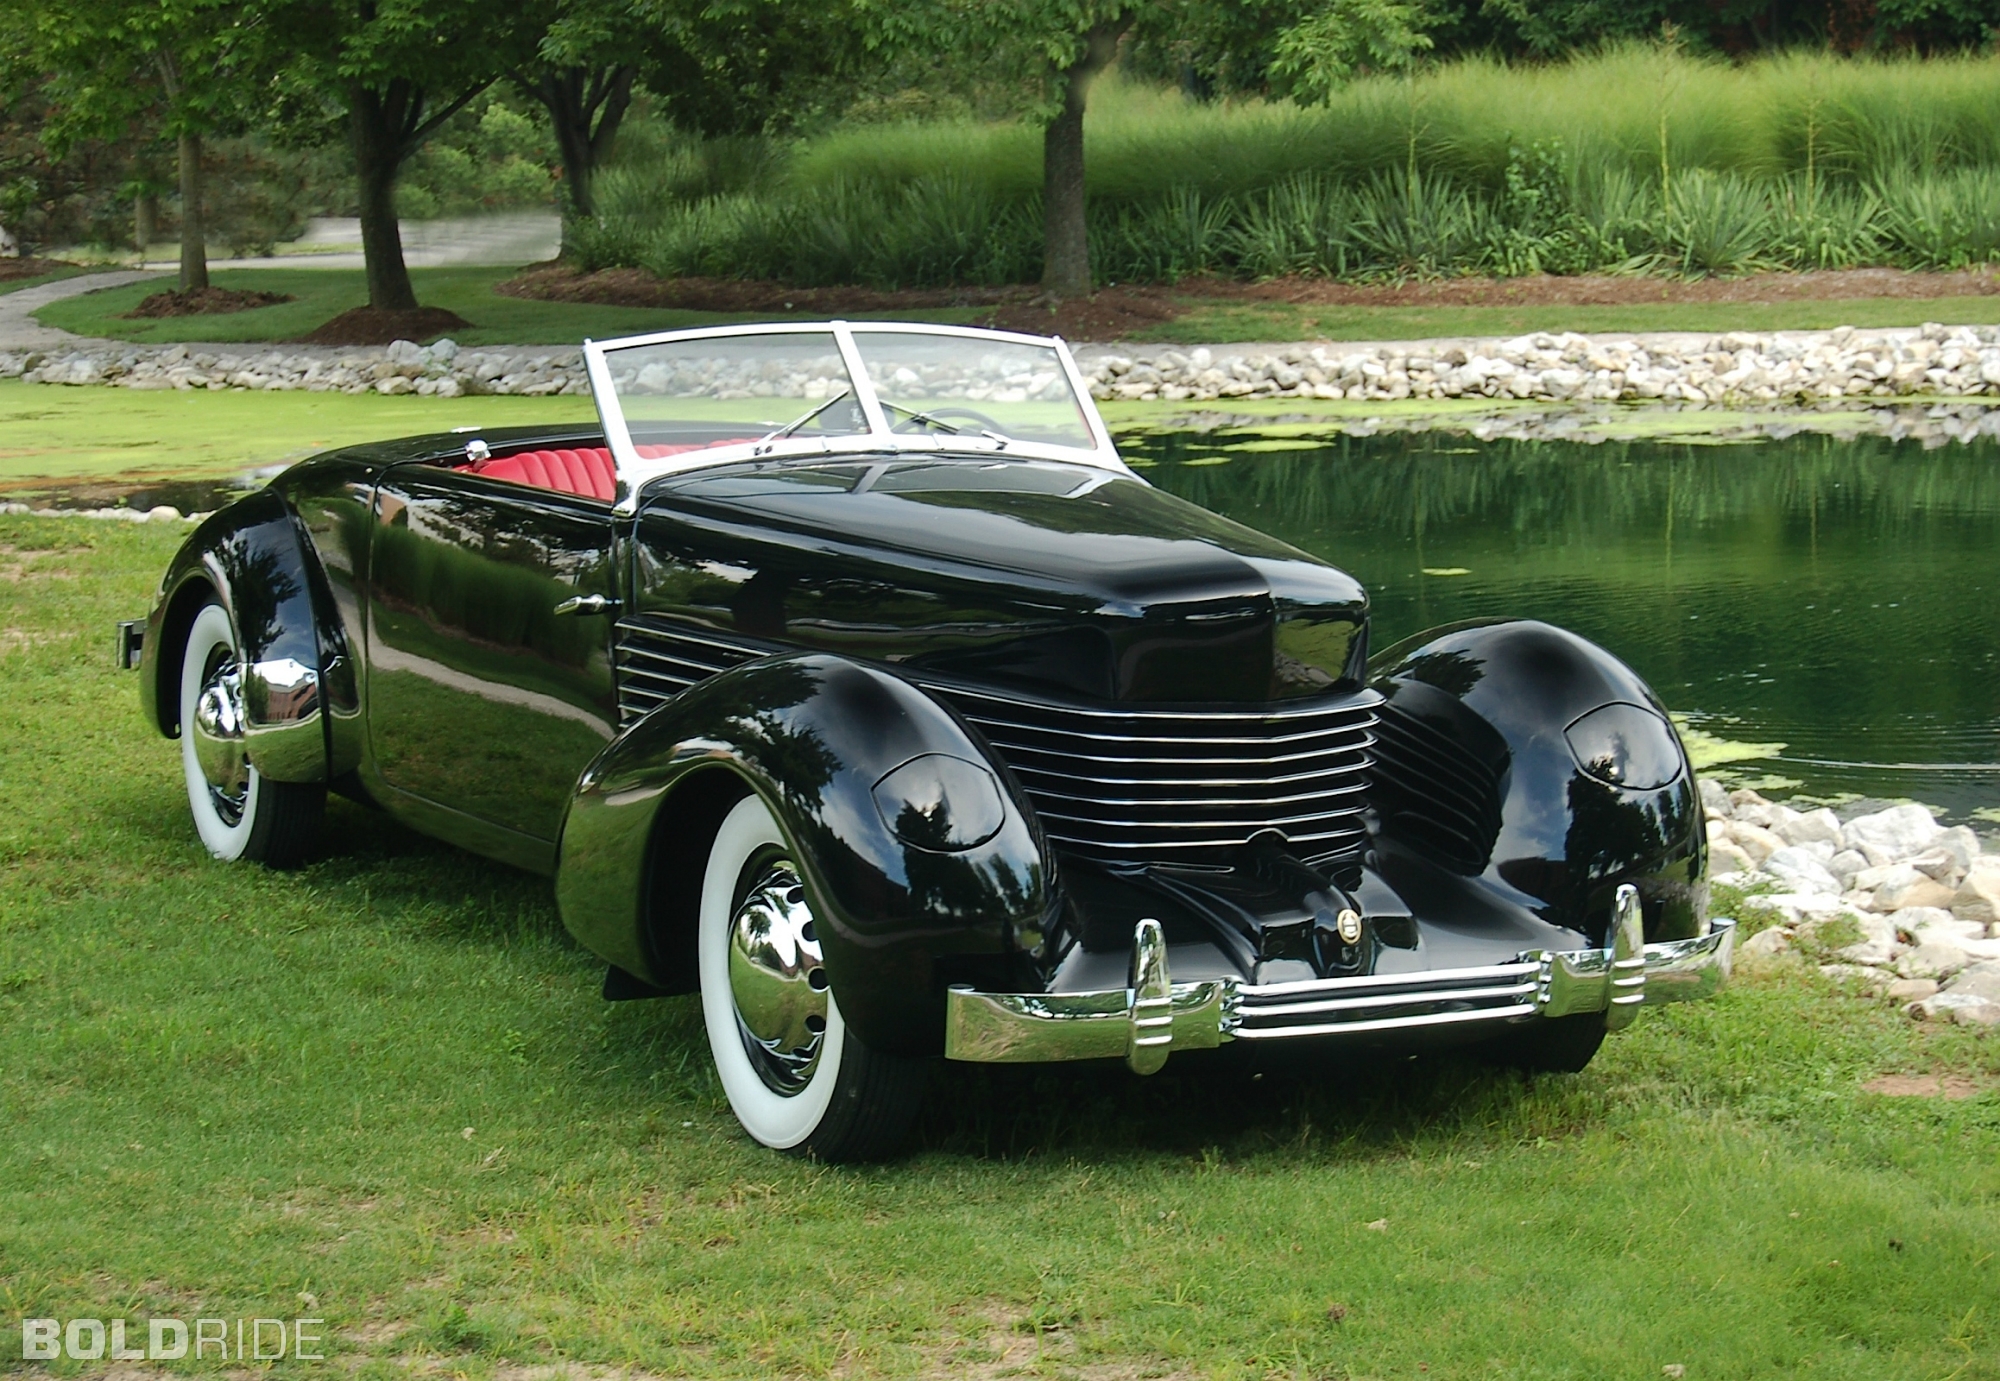 1936 Cord 810 Convertible Coupe Boldride.com - Pictures, Wallpapers